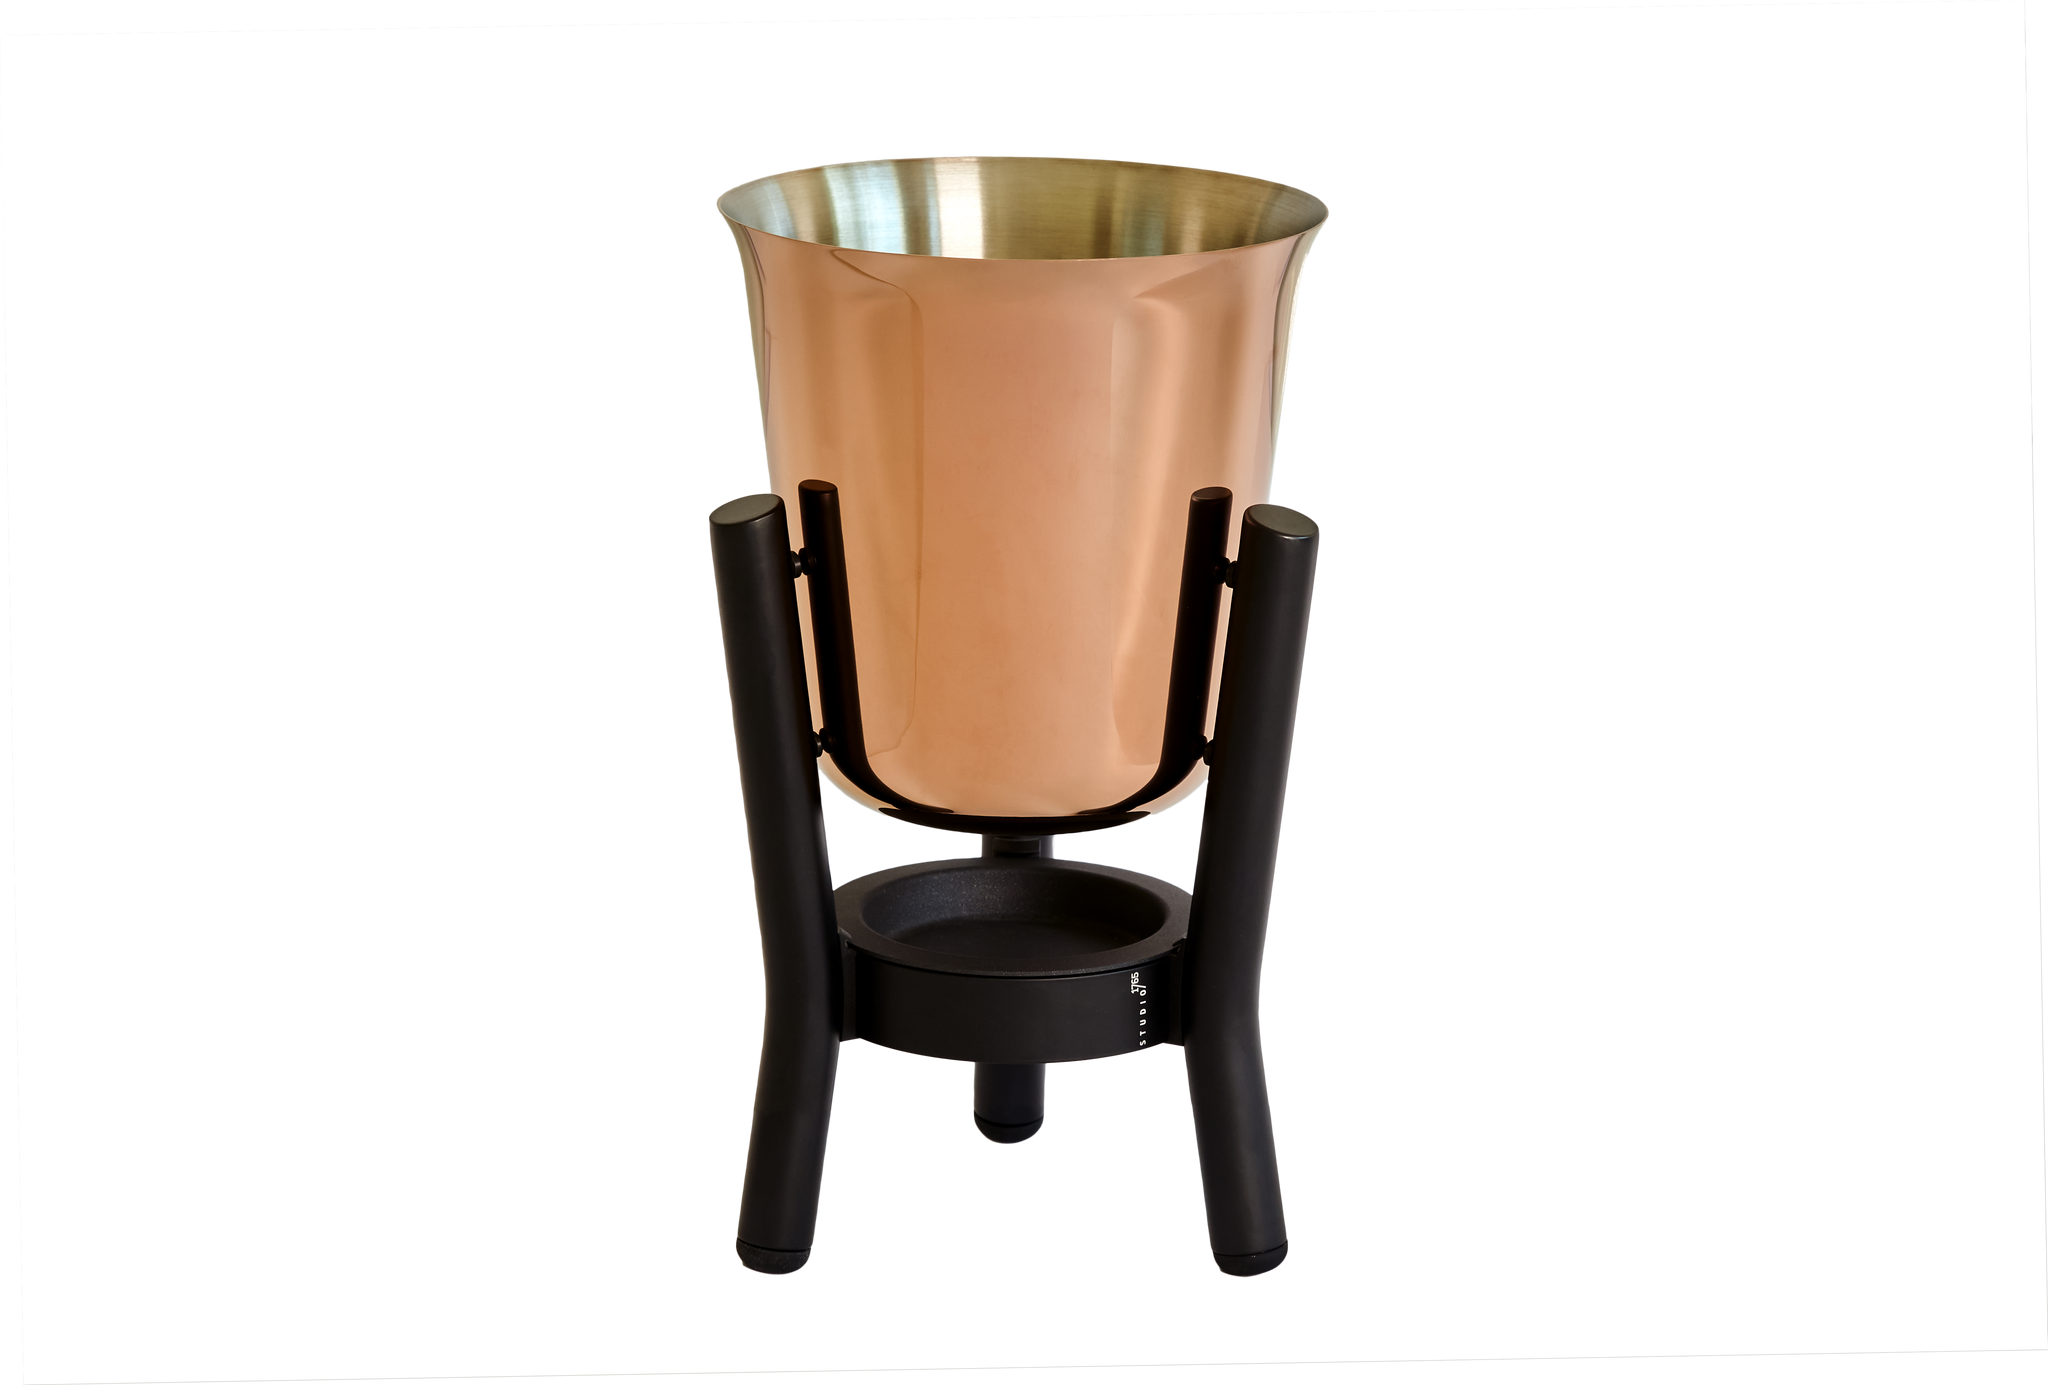 PVD Copper coated Stainless Steel Champagne Cooler with Matt Black Stand